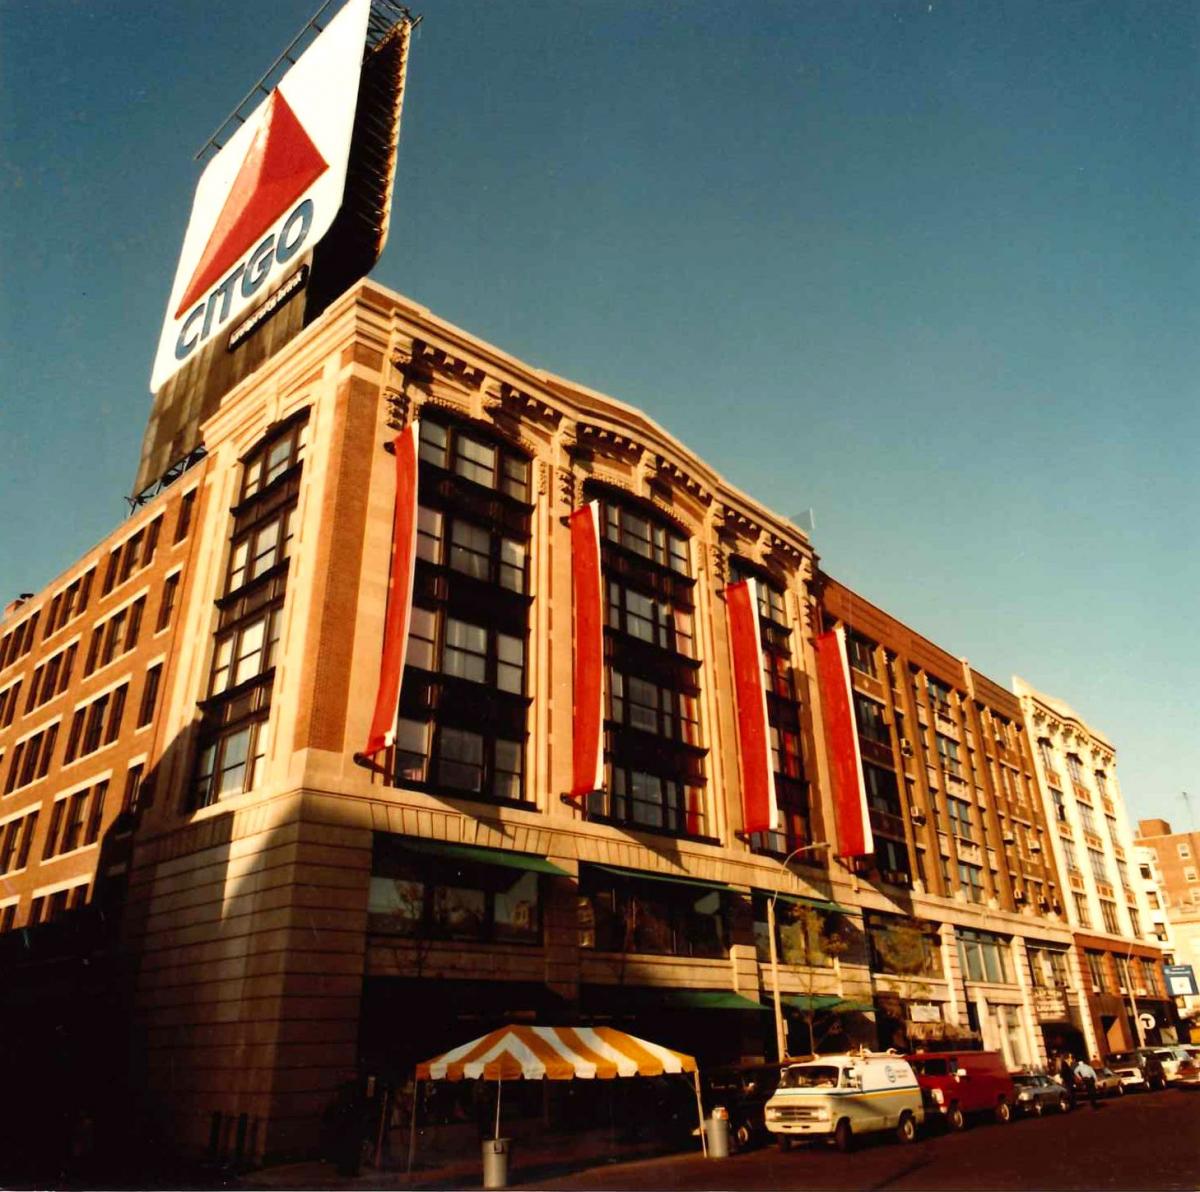 The Boston University Bookstore building with the iconic Citgo sign on the roof.